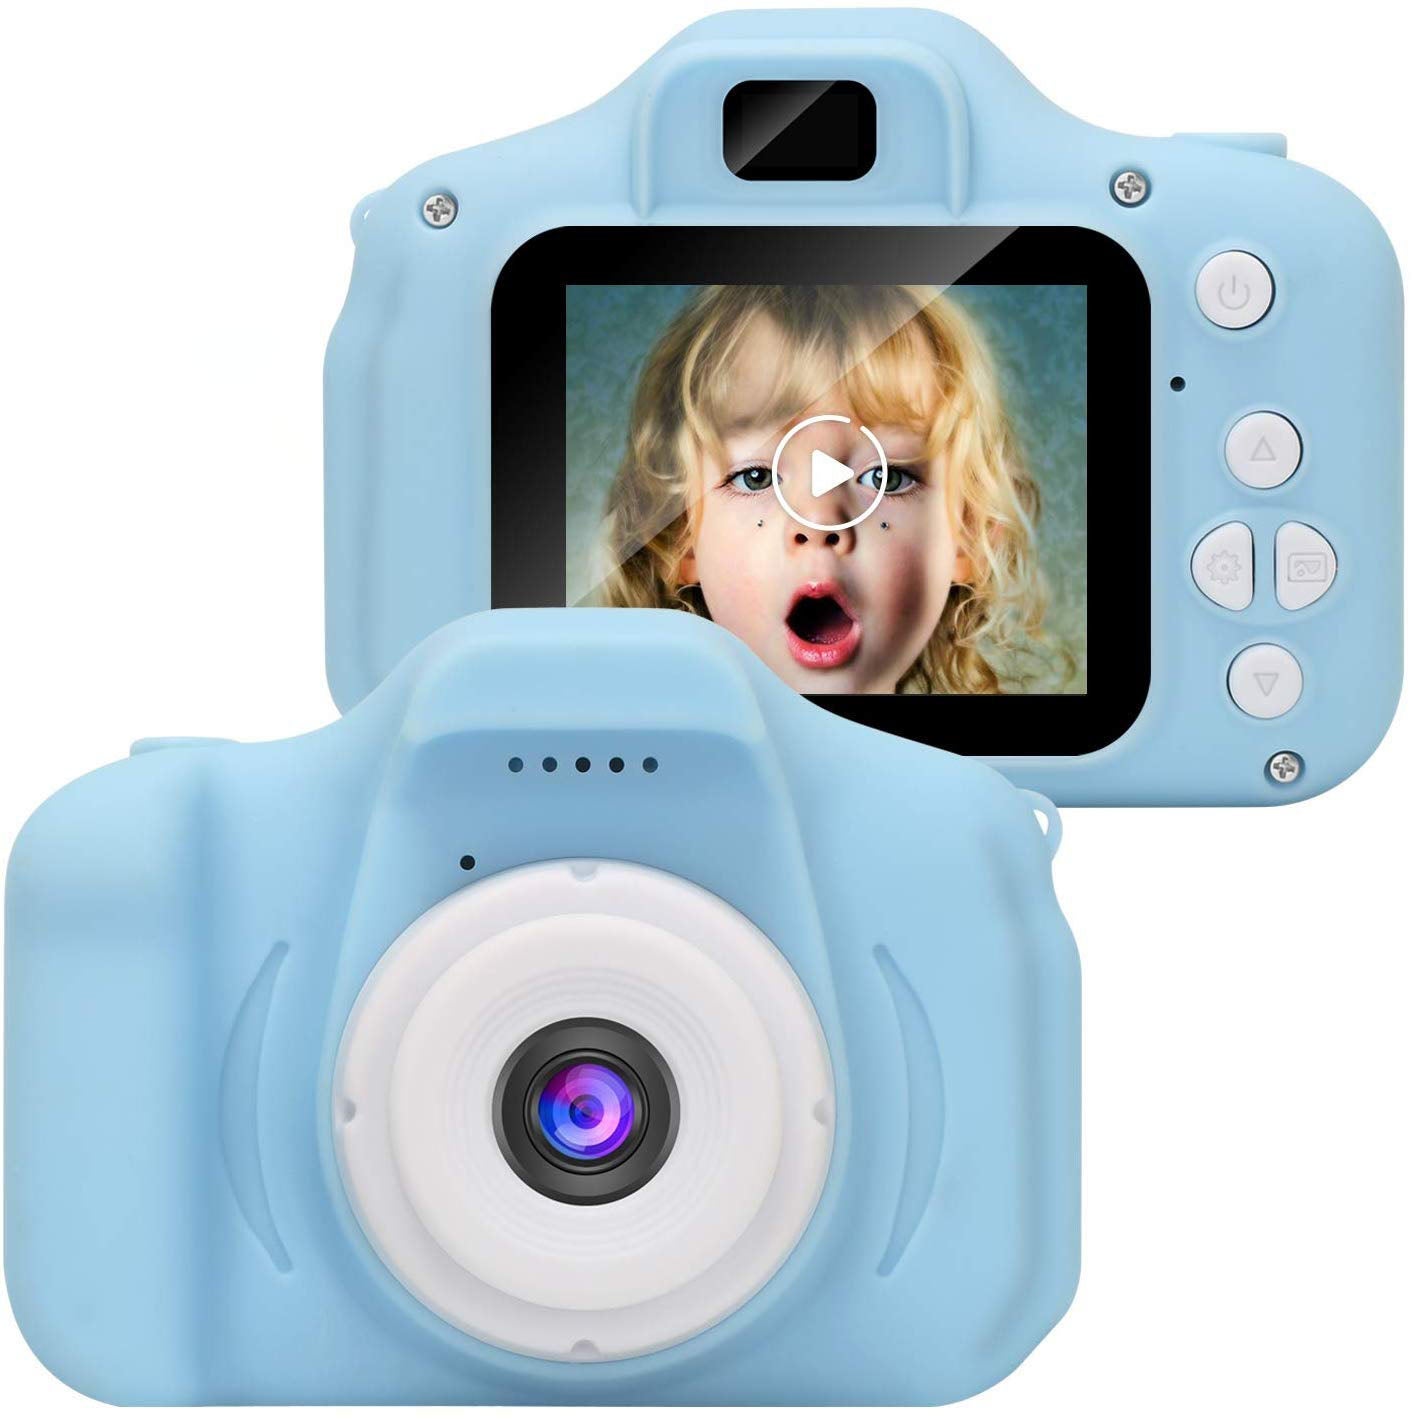 Kids Digital Video Camera 5MP 1080P HD Recorder Camcorder with 1.77 Inch Screen Funkprofi Kids Camera Creative Birthday Gifts for Kids 32GB TF Card Included 